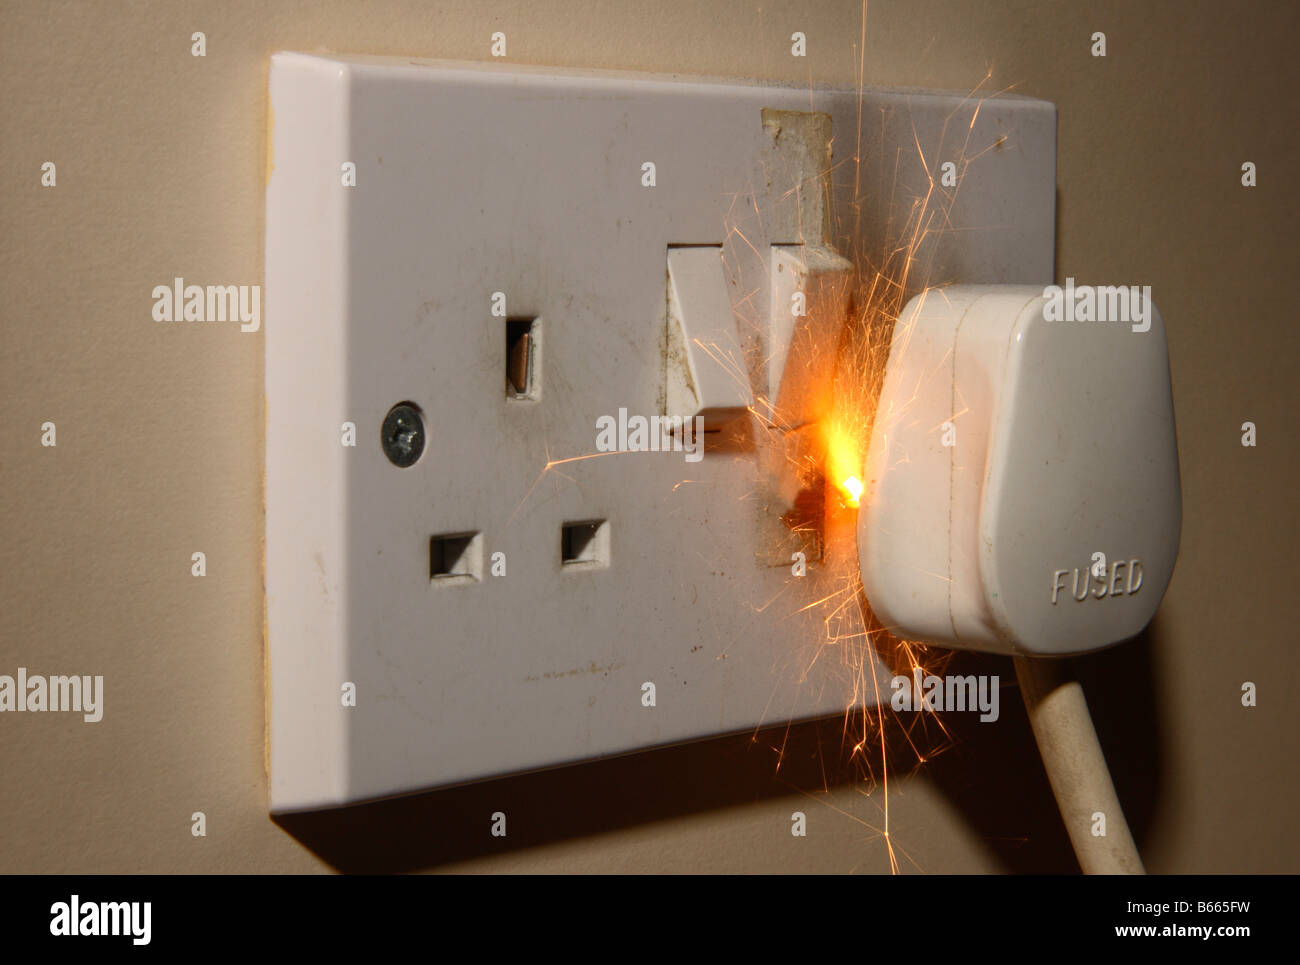 A fire in a 13A 240V electrical mains plug and socket. Stock Photo